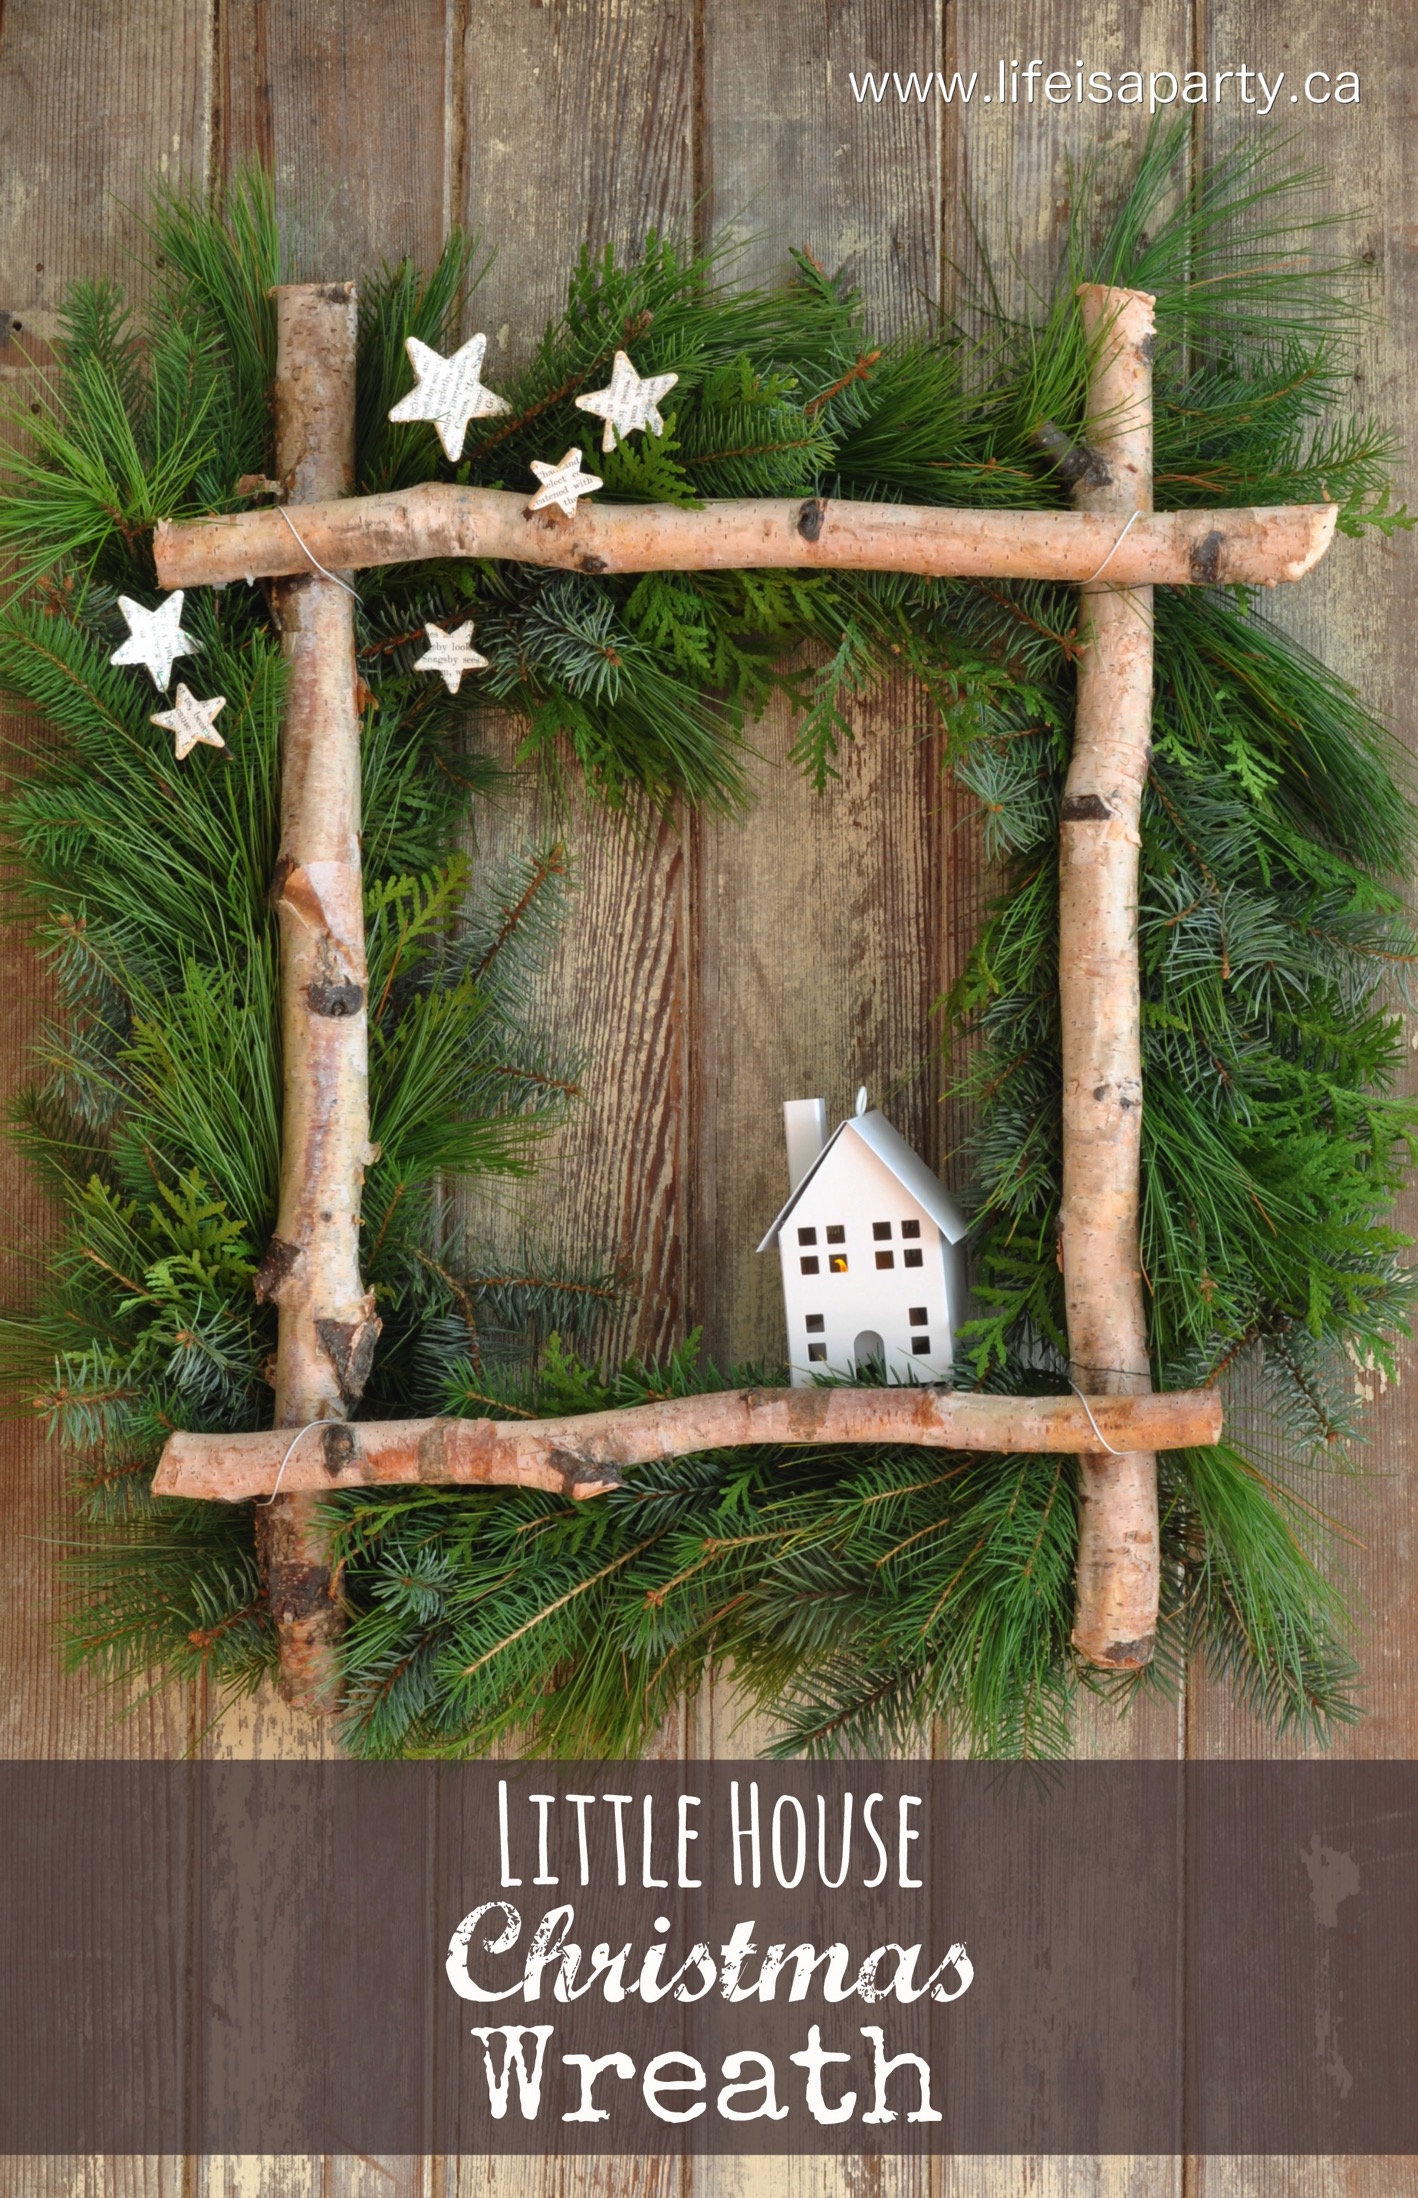 Birch Christmas Wreath:-full tutorial to make your own square wreath from some gathered greens, birch logs, and a coat hanger. Perfect for Christmas.